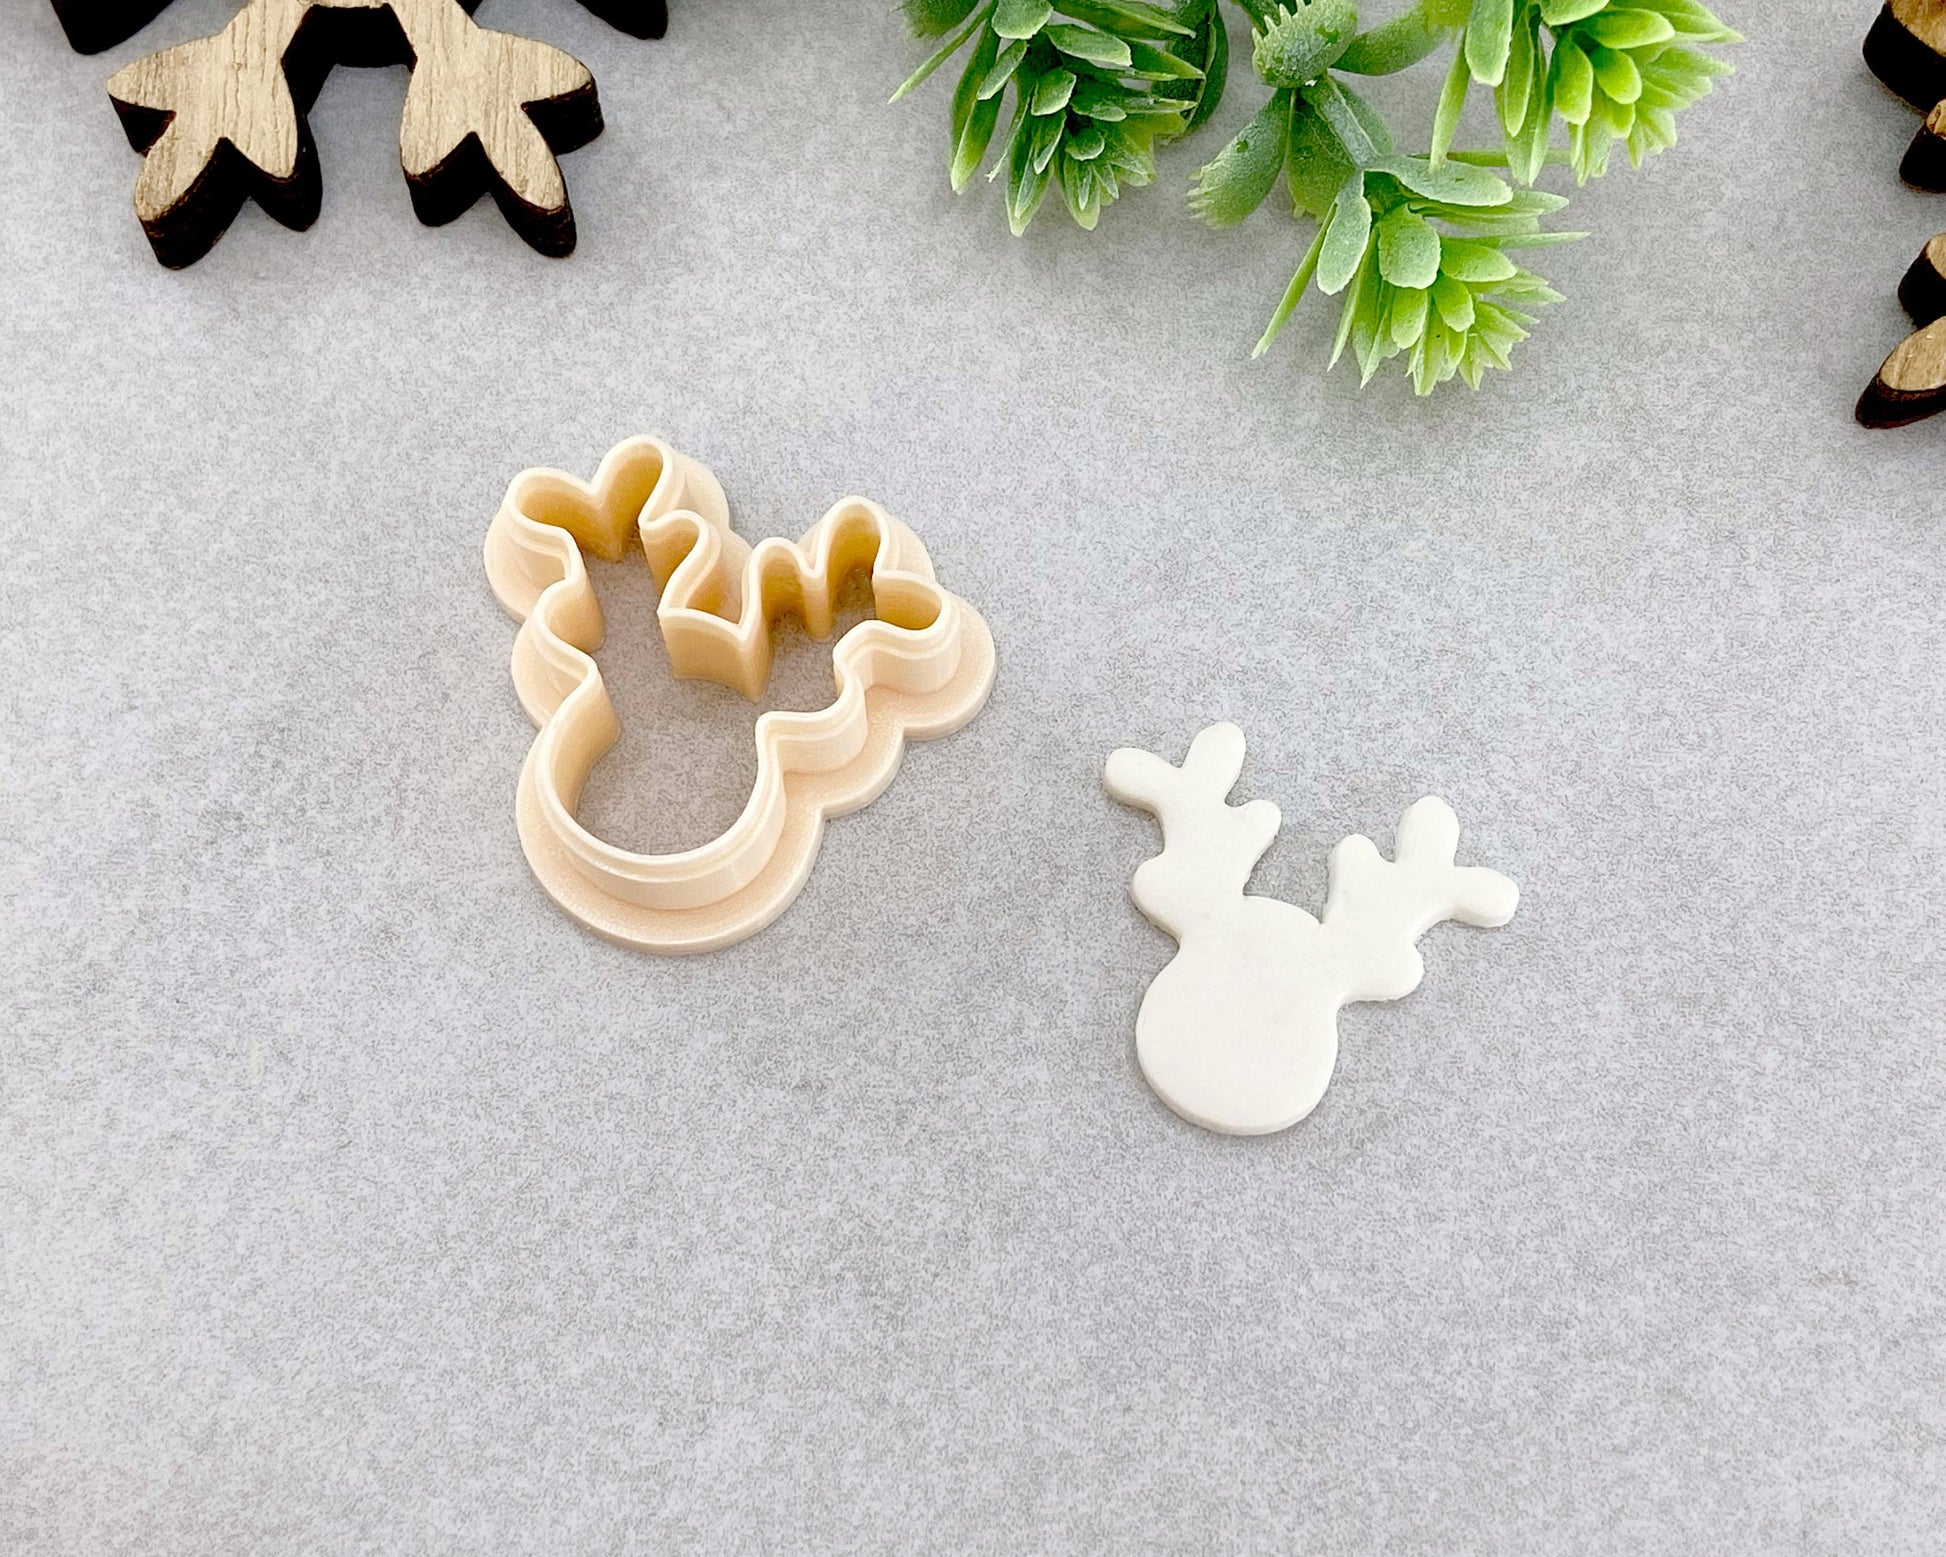 Christmas Clay Cutter Set #1